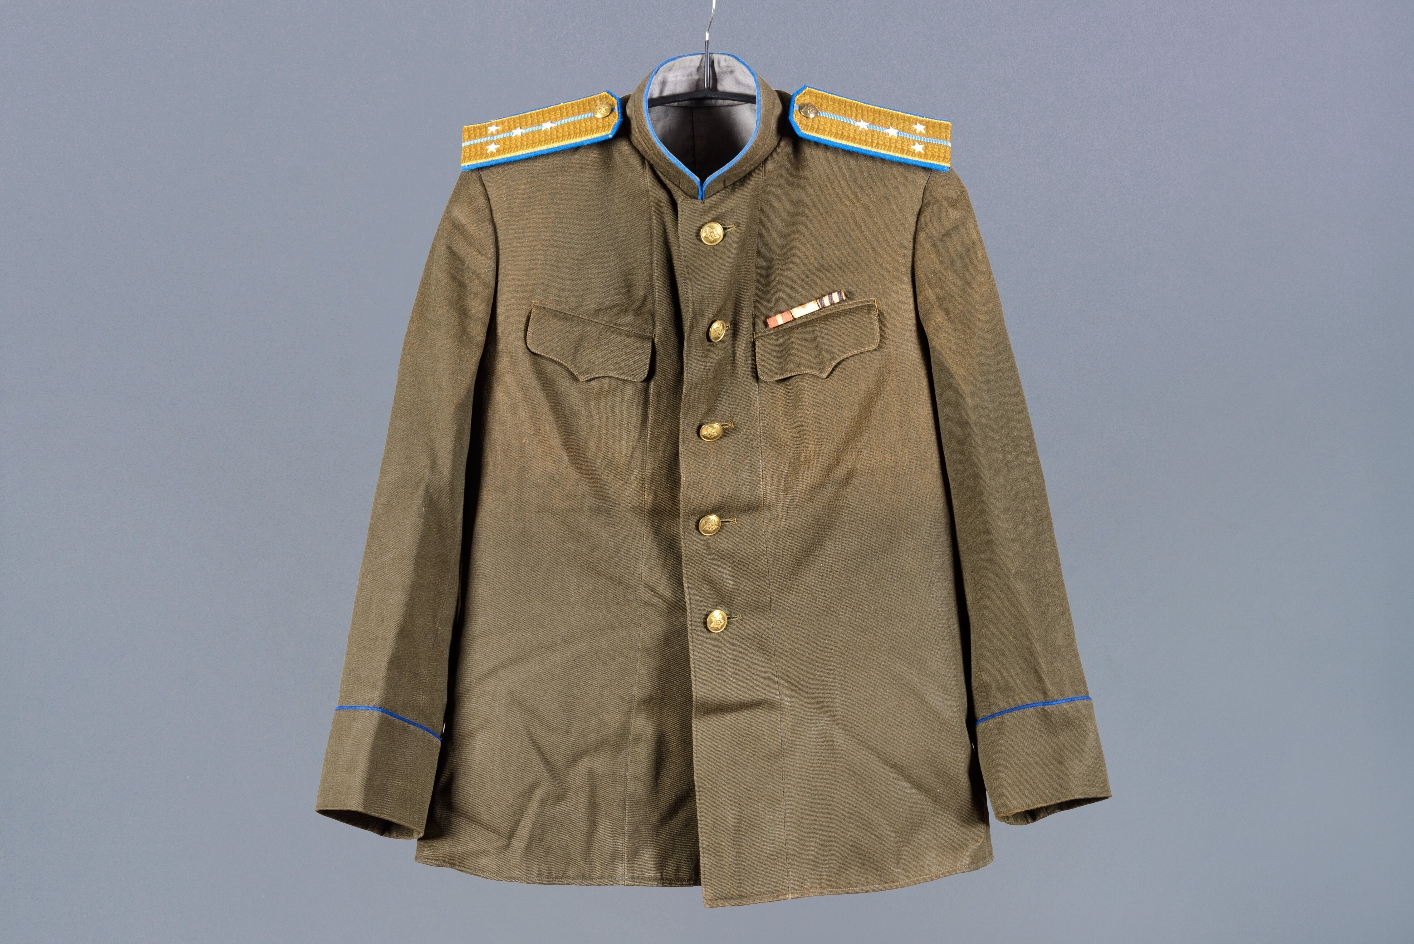 Photo of an olive green uniform jacket of an employee of the NKVD in the rank of captain. On both shoulders are blue-yellow epaulettes. The uniform has golden buttons.